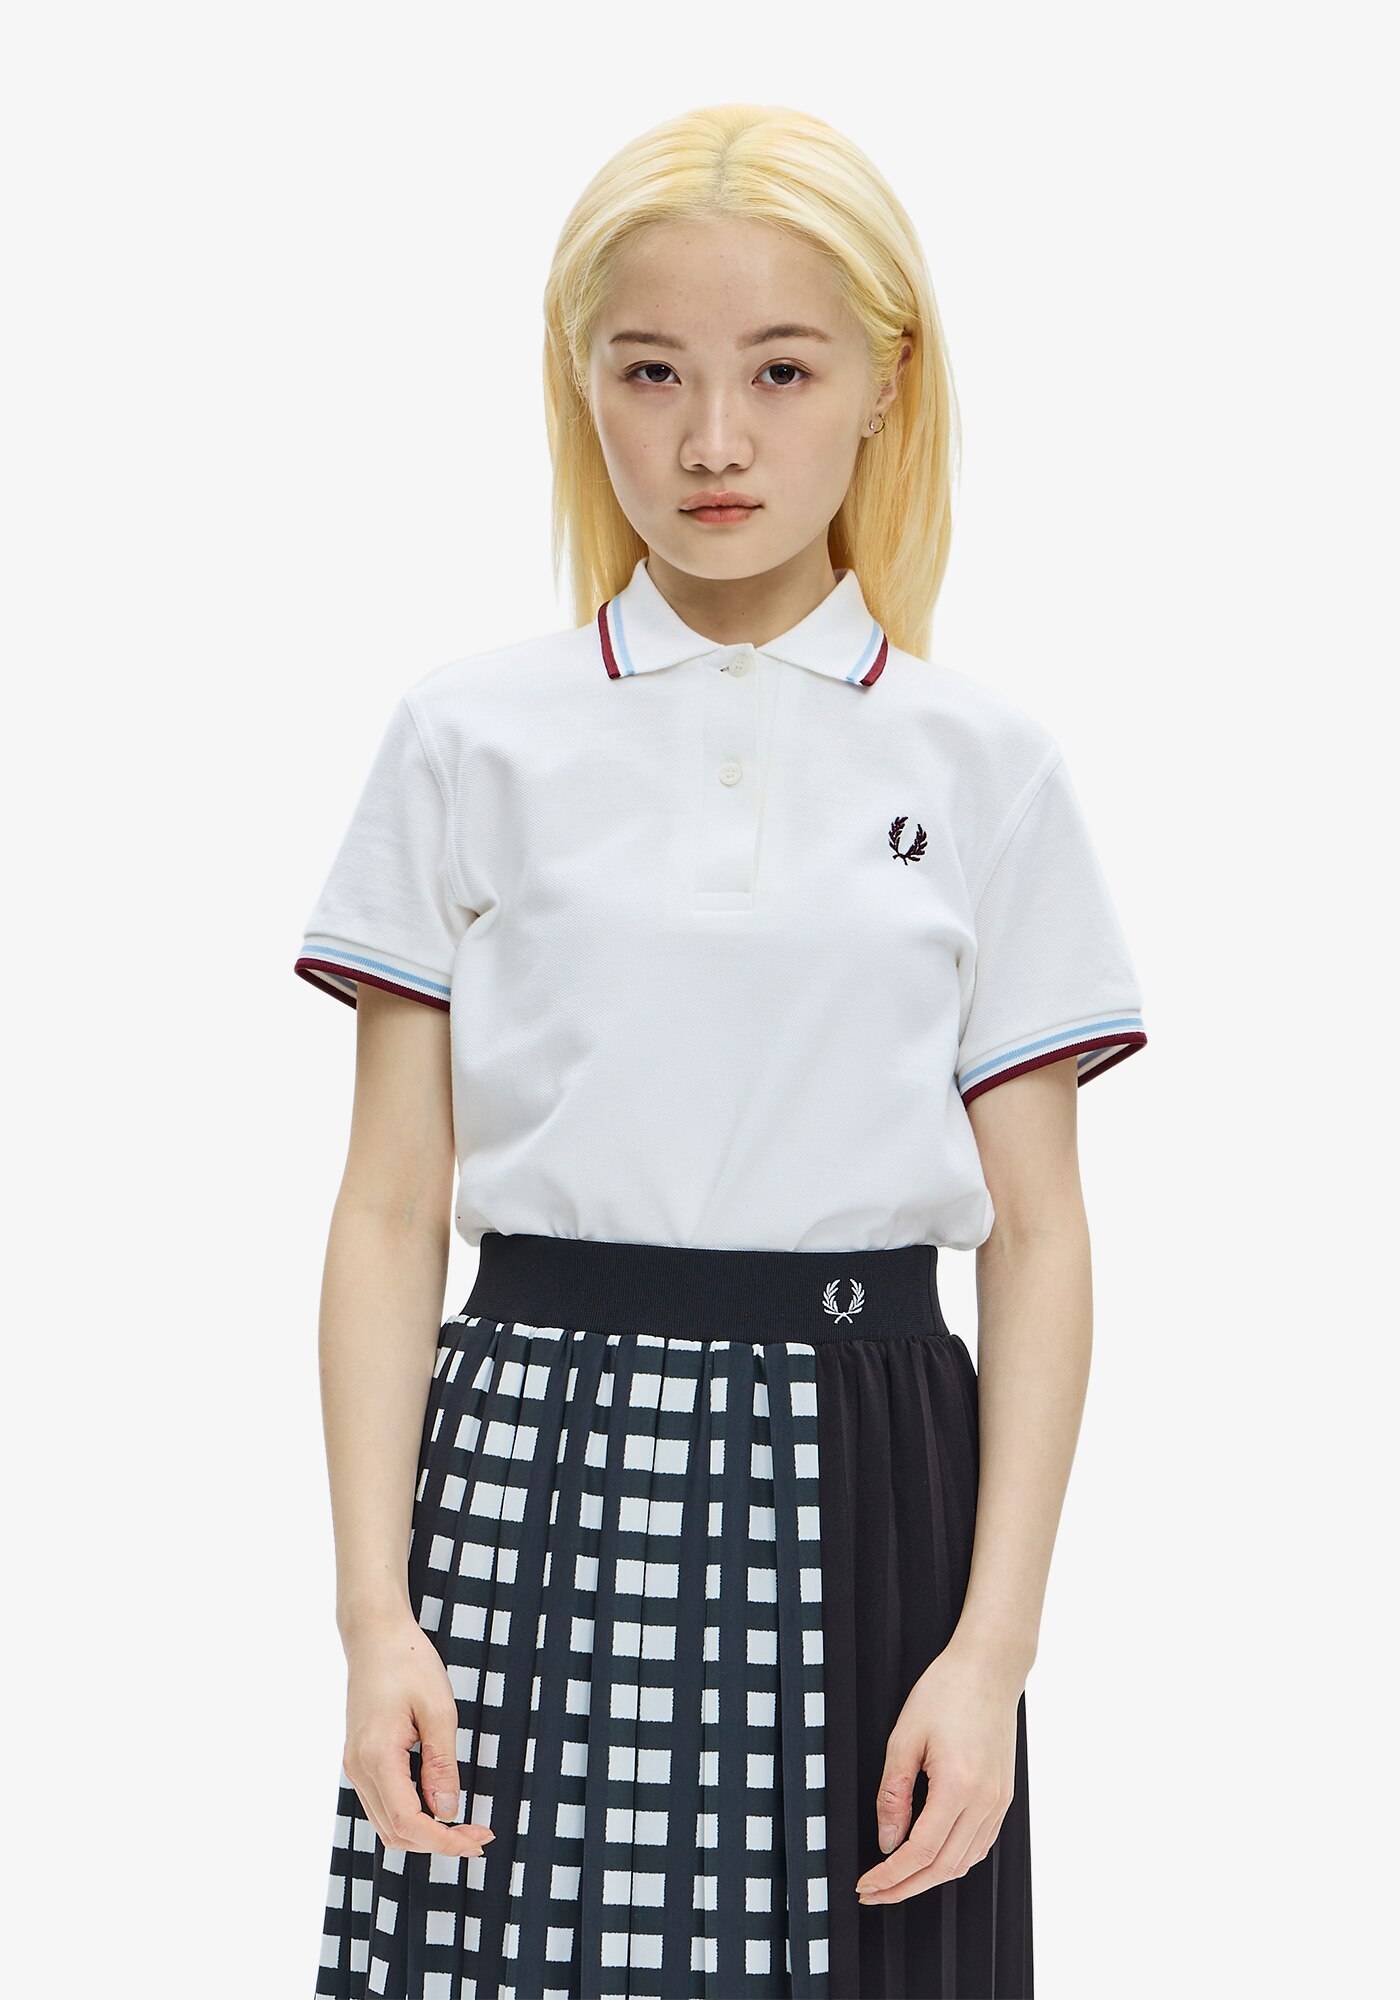 The Fred Perry Shirt - G12|FRED PERRY(フレッドペリー)の通販 